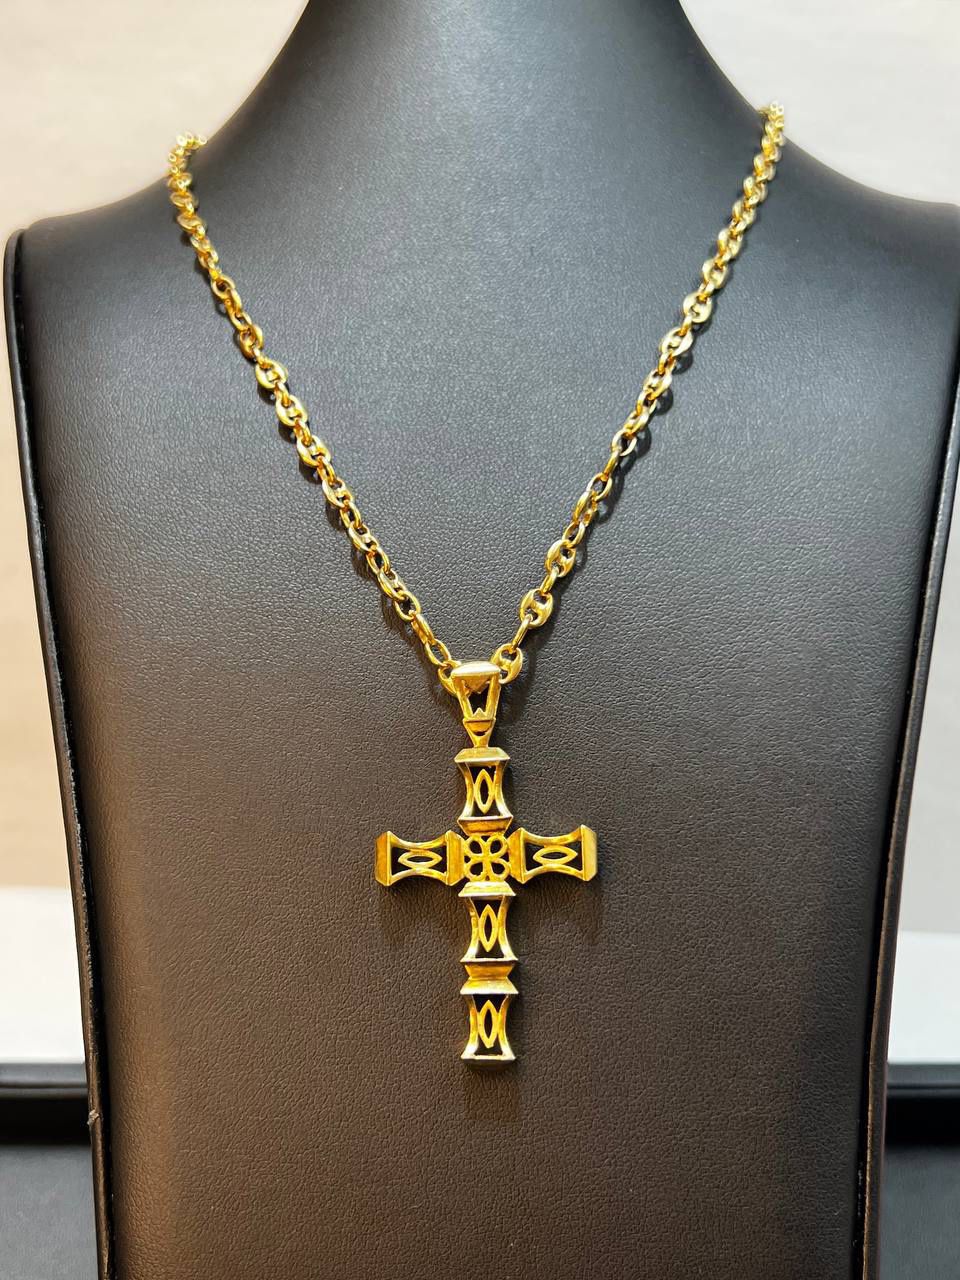 18k yellow gold Gucci style chain with cross